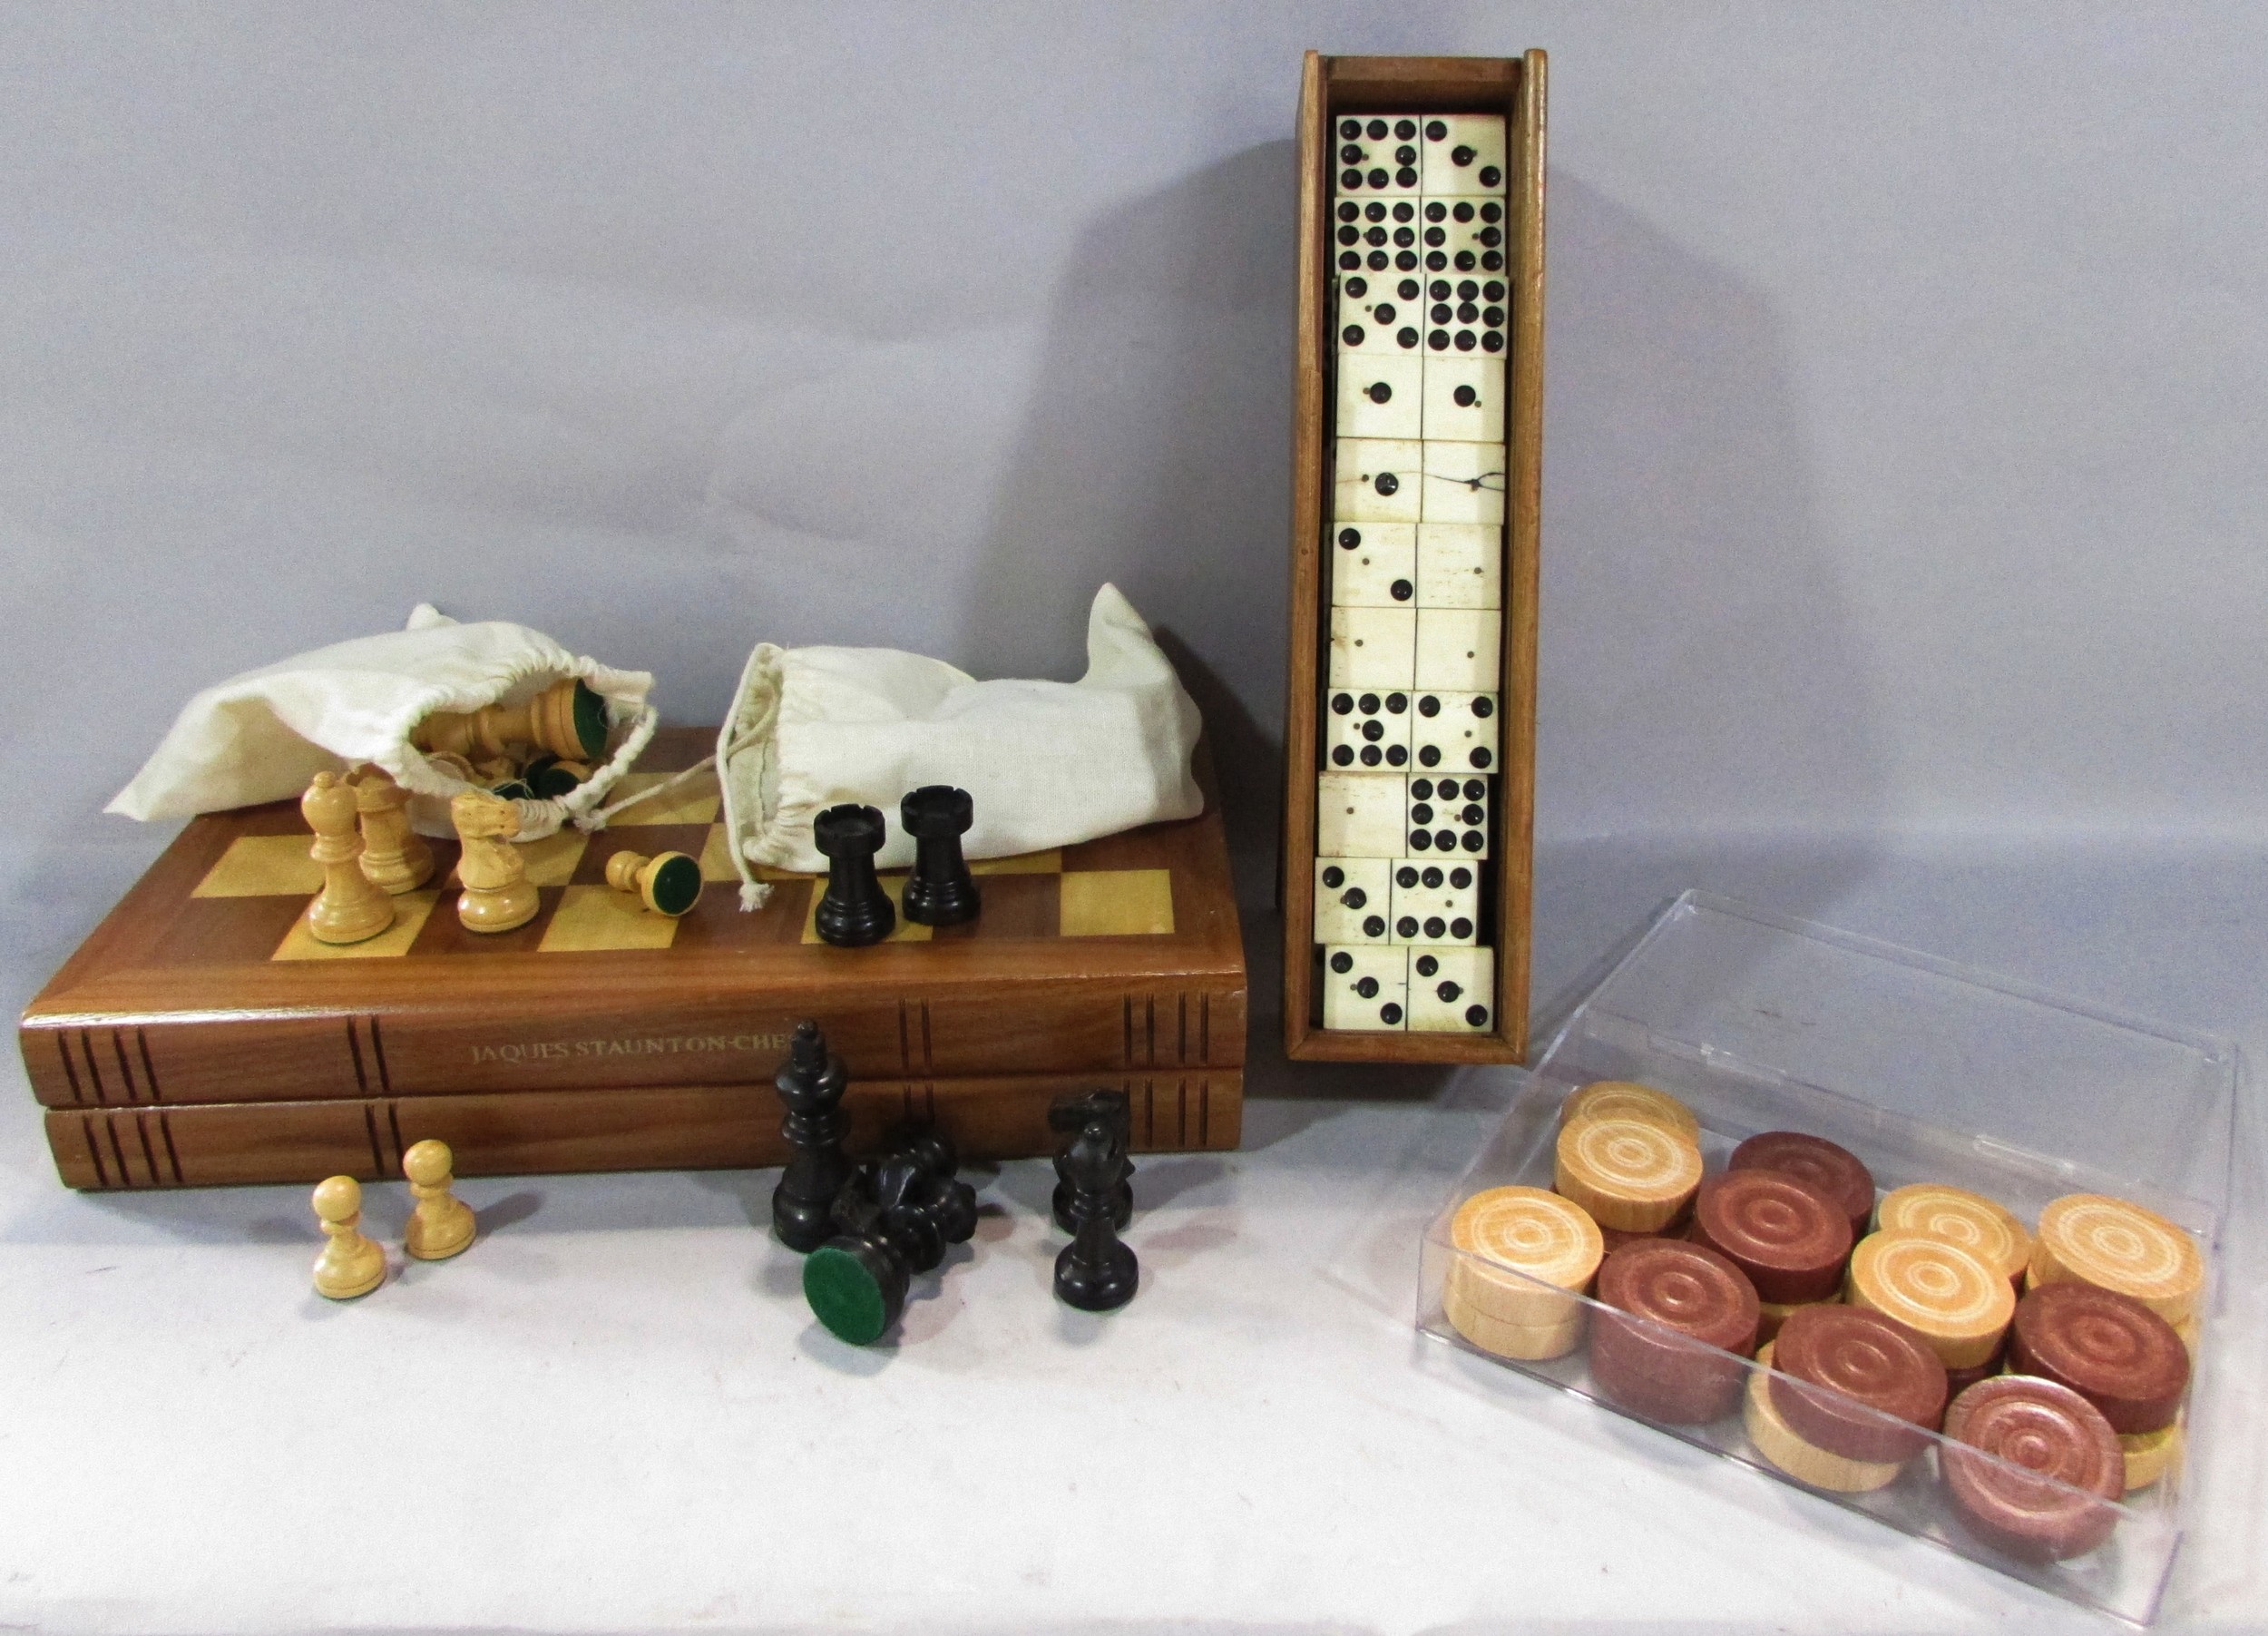 An Antique Nine Dot Domino set in a wooden case, only 53 tiles, a set of wooden draughts counters,